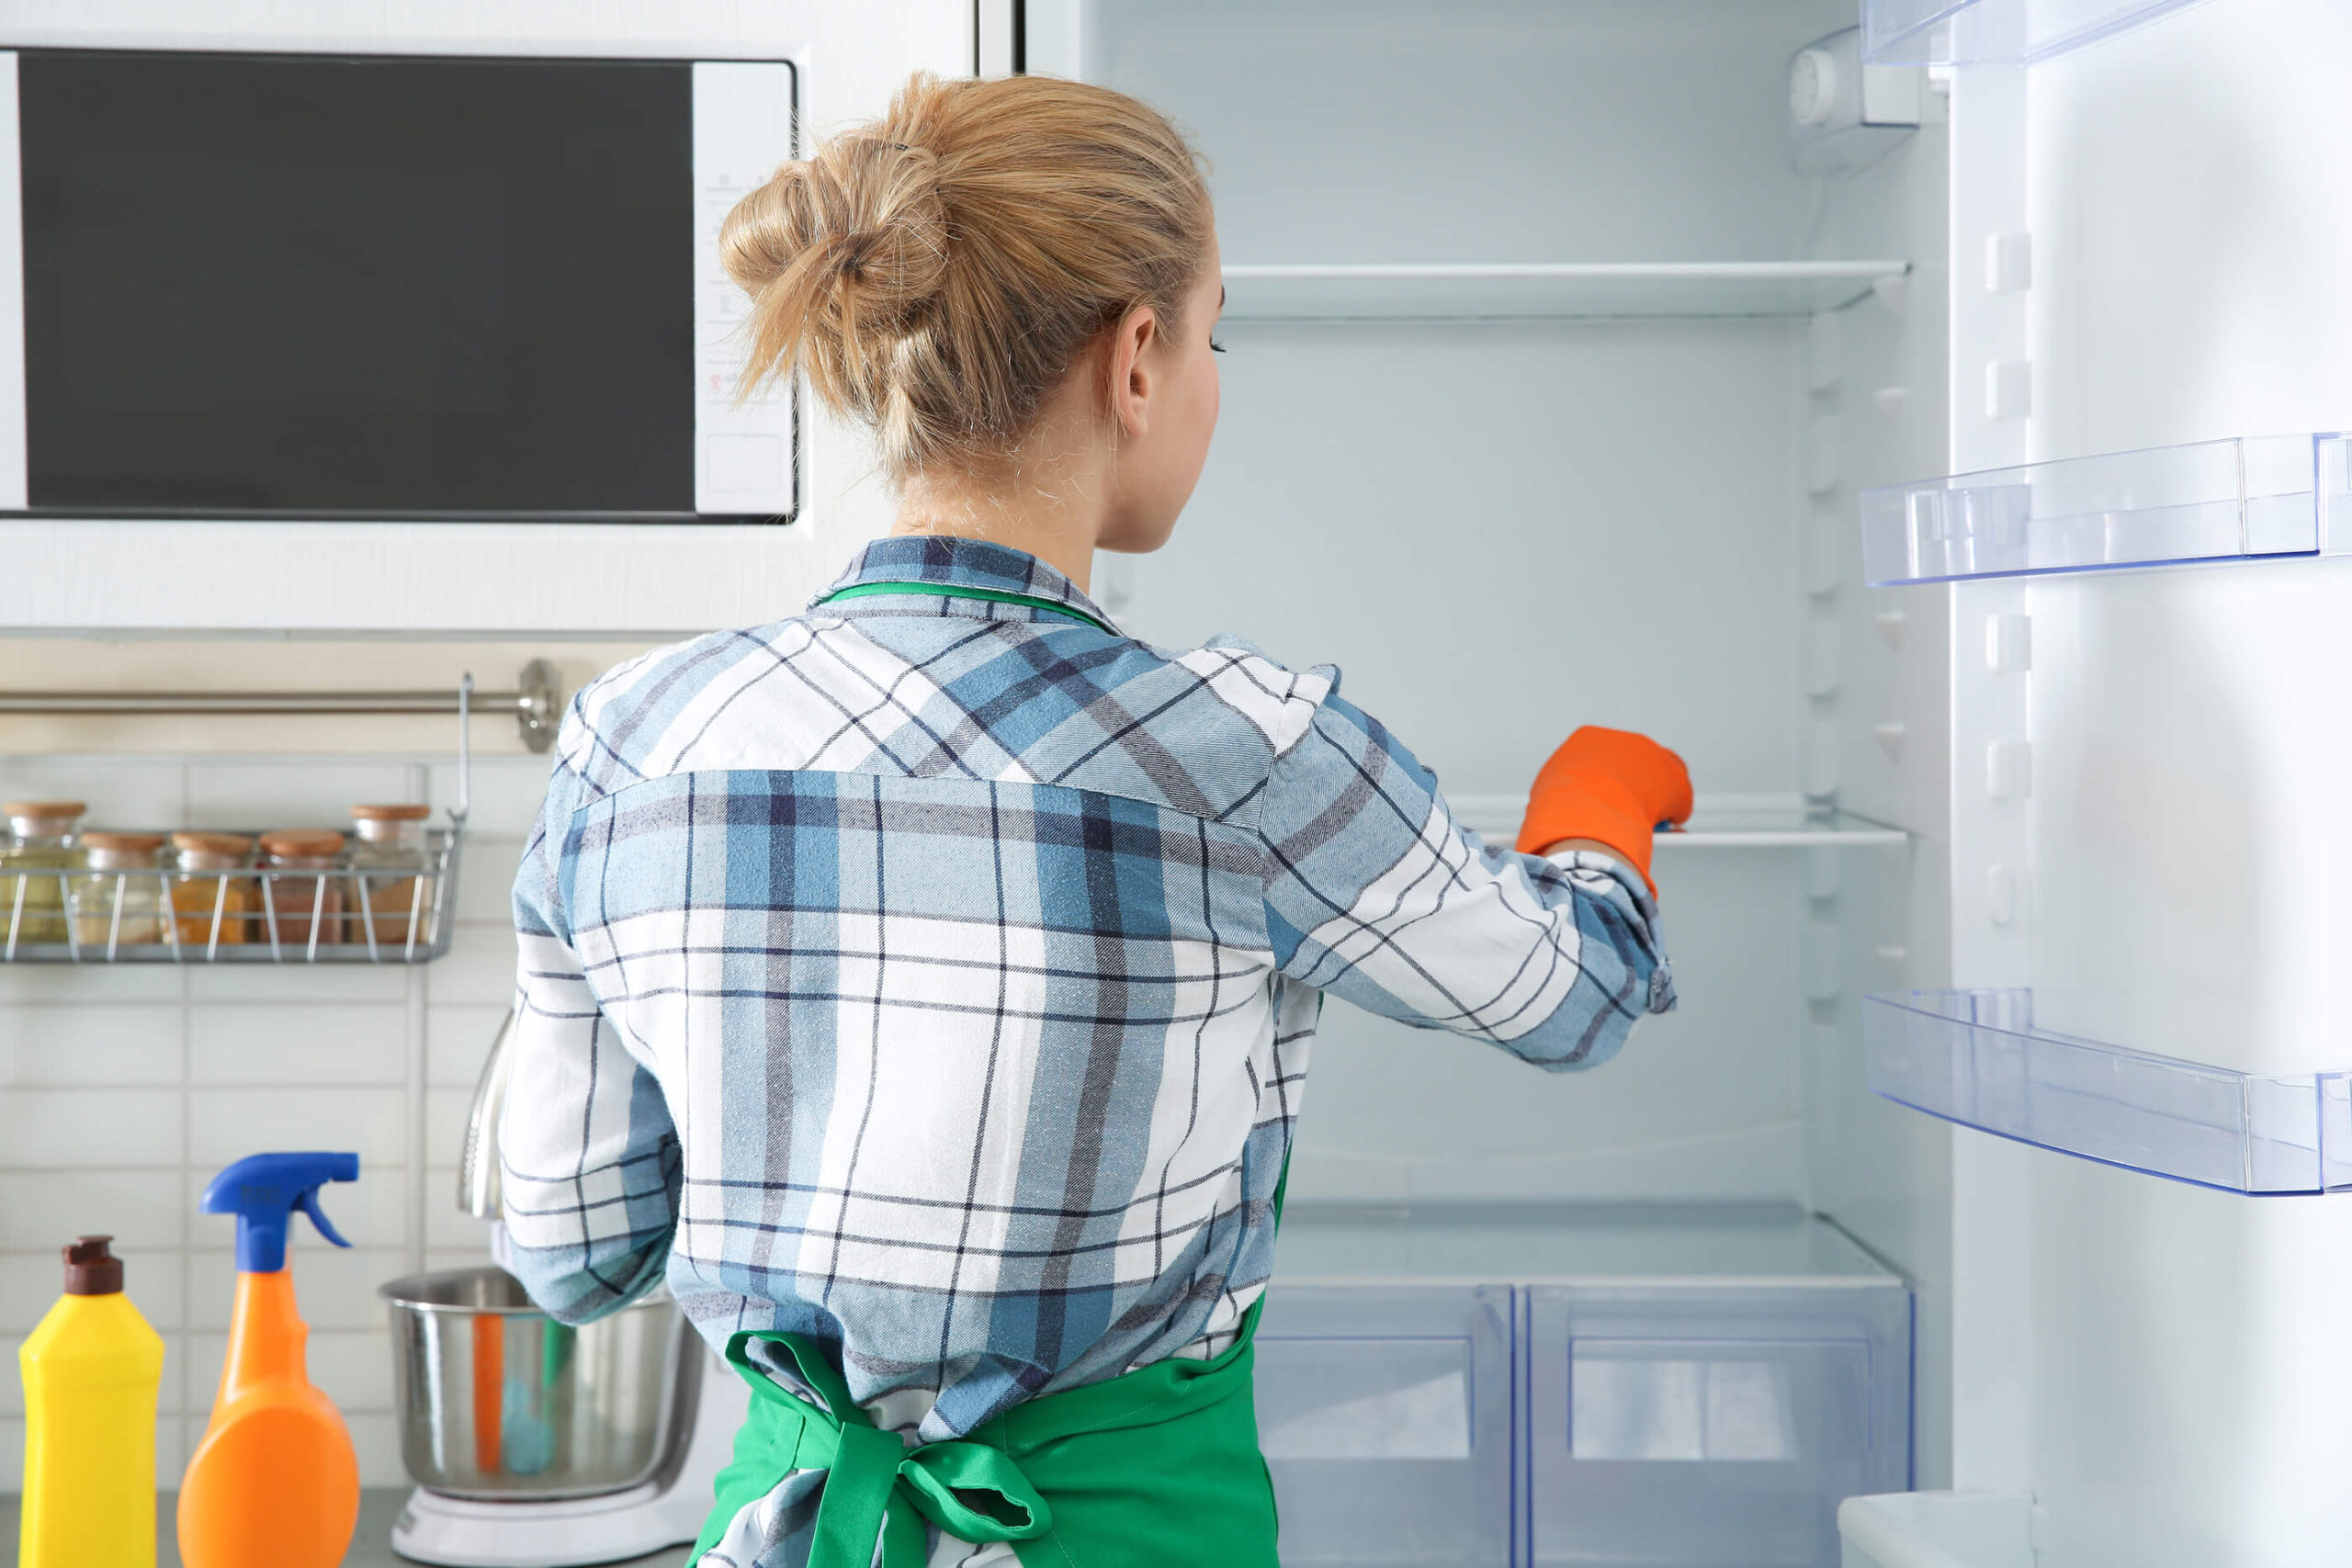 Woman-Gloves-Cleaning-Refrigerator